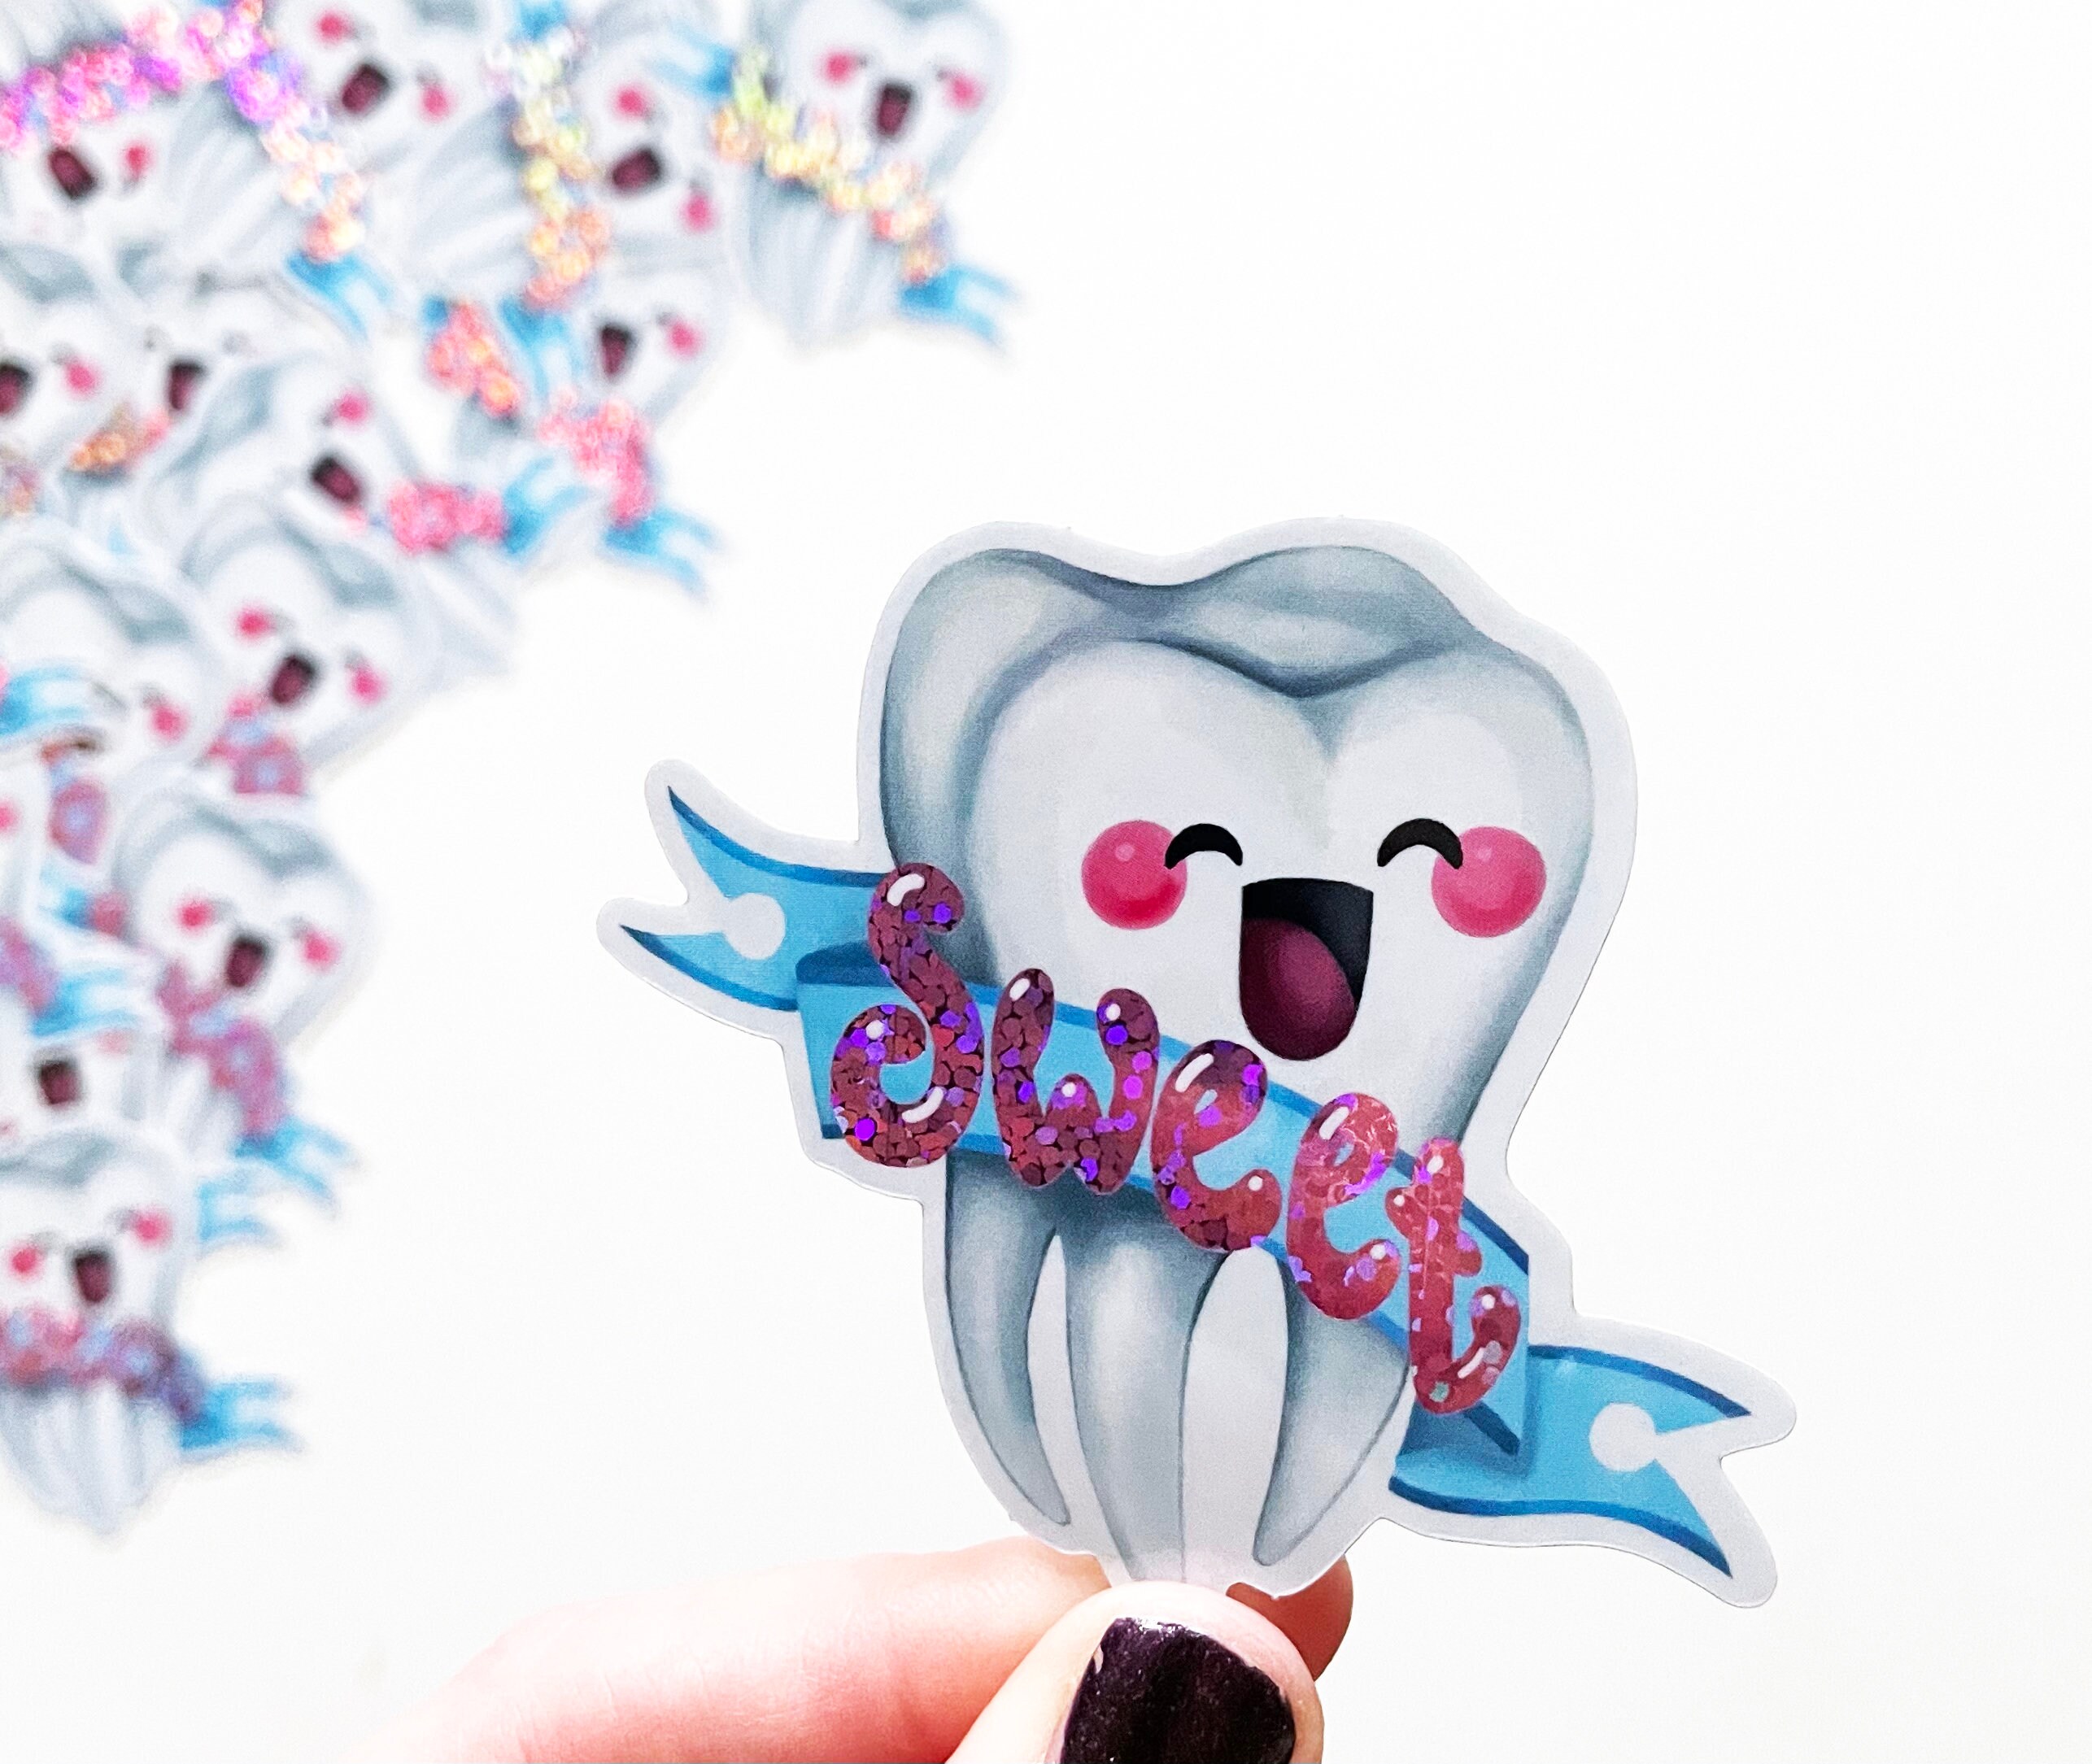 Sweet Tooth Epoxy Stickers #6566 :: Cooking Stickers